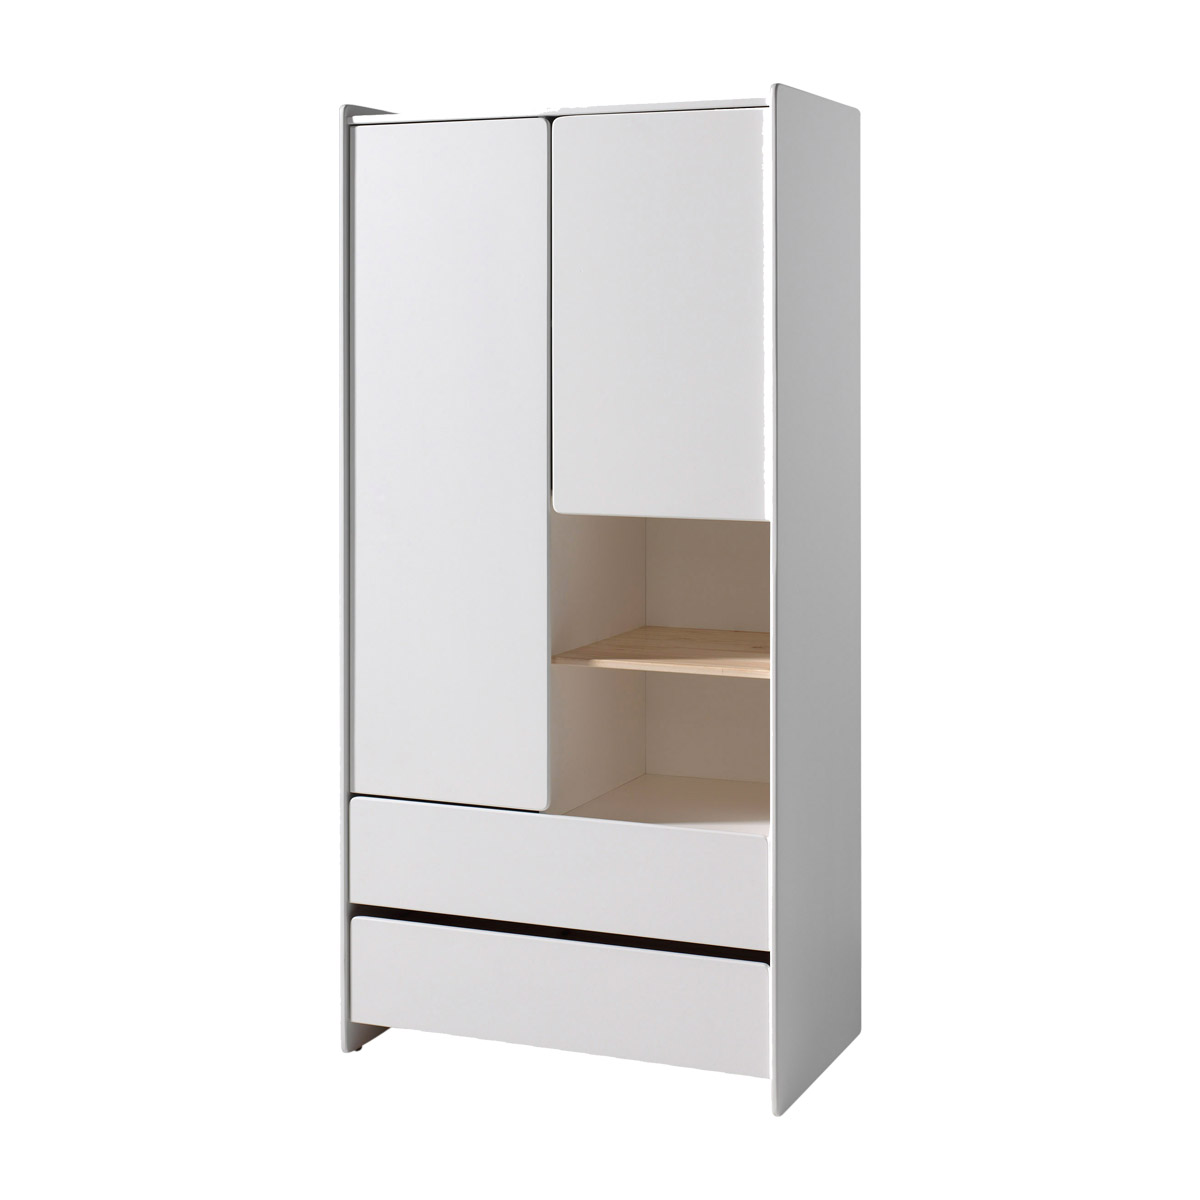 Vipack_kiddy_armoire_2_portes